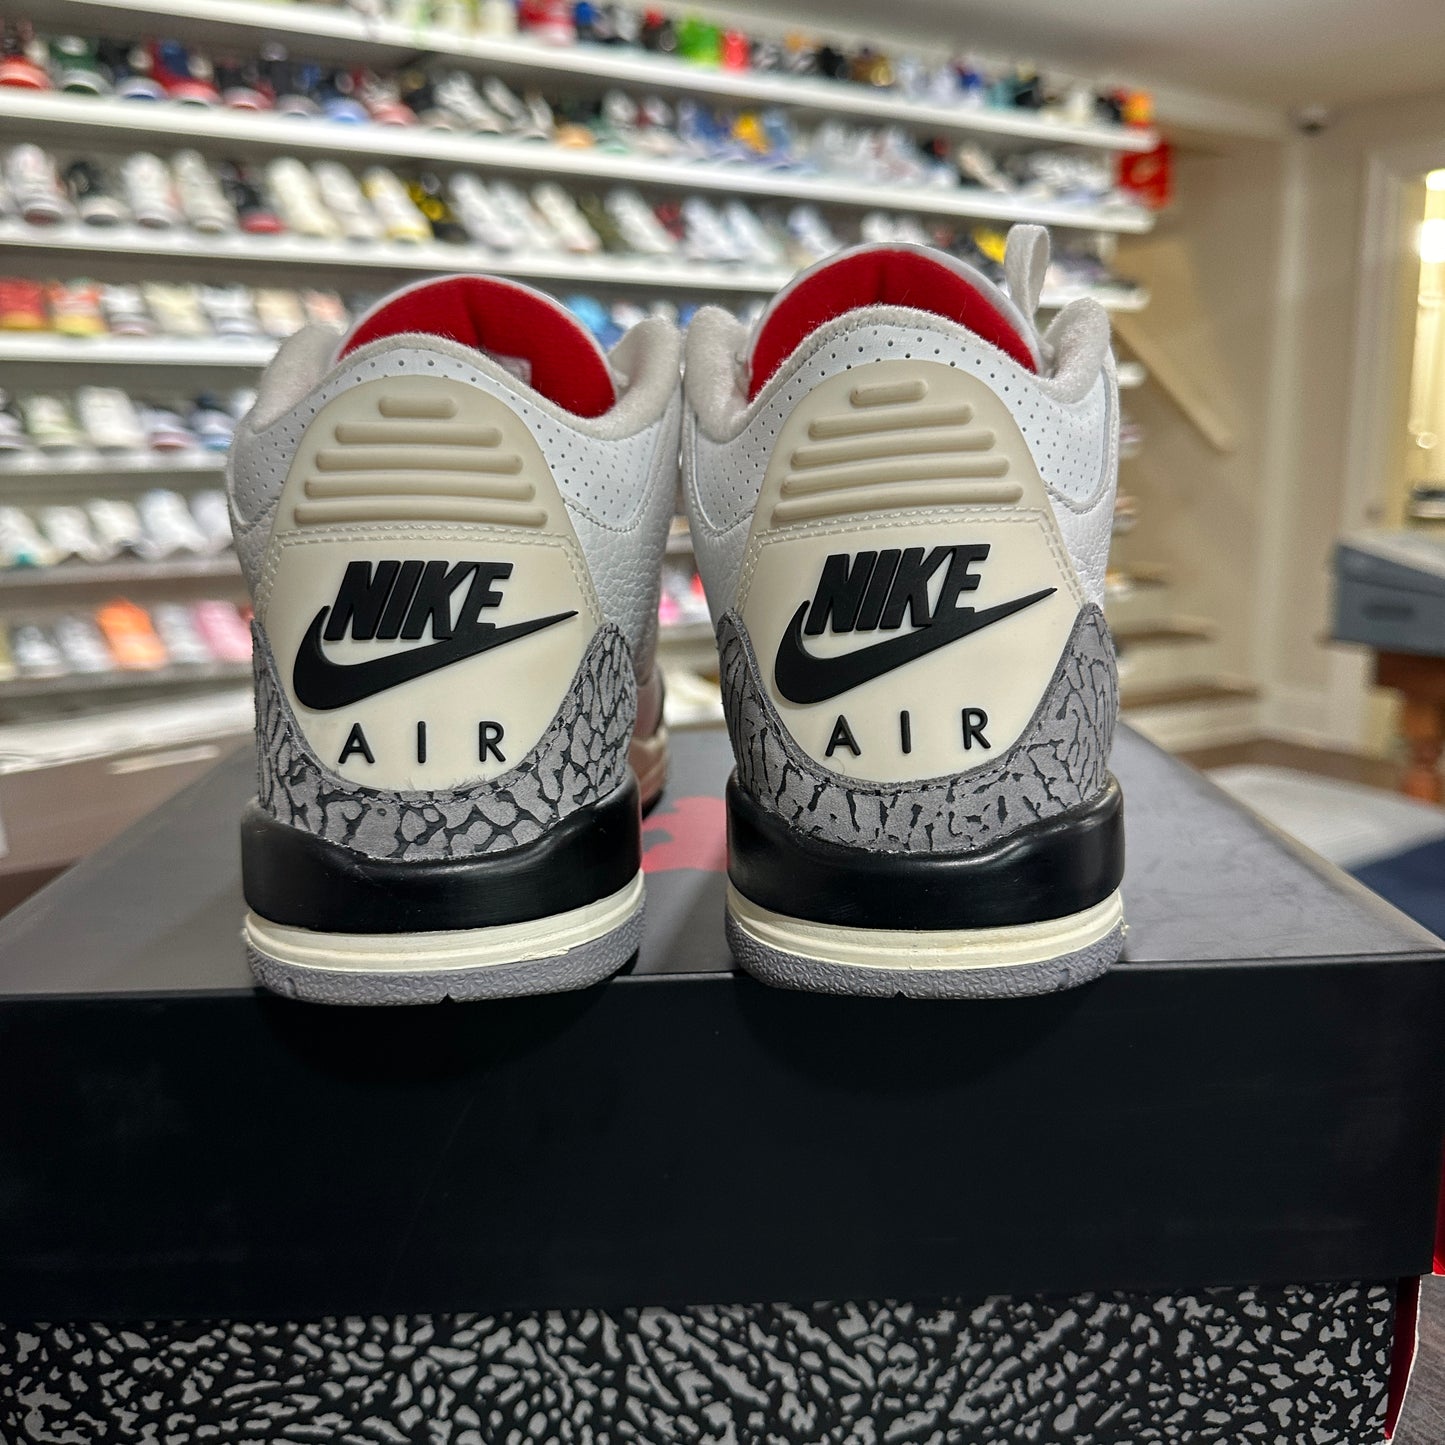 *USED* Air Jordan 3 Reimagined White Cement (size 5.5y)